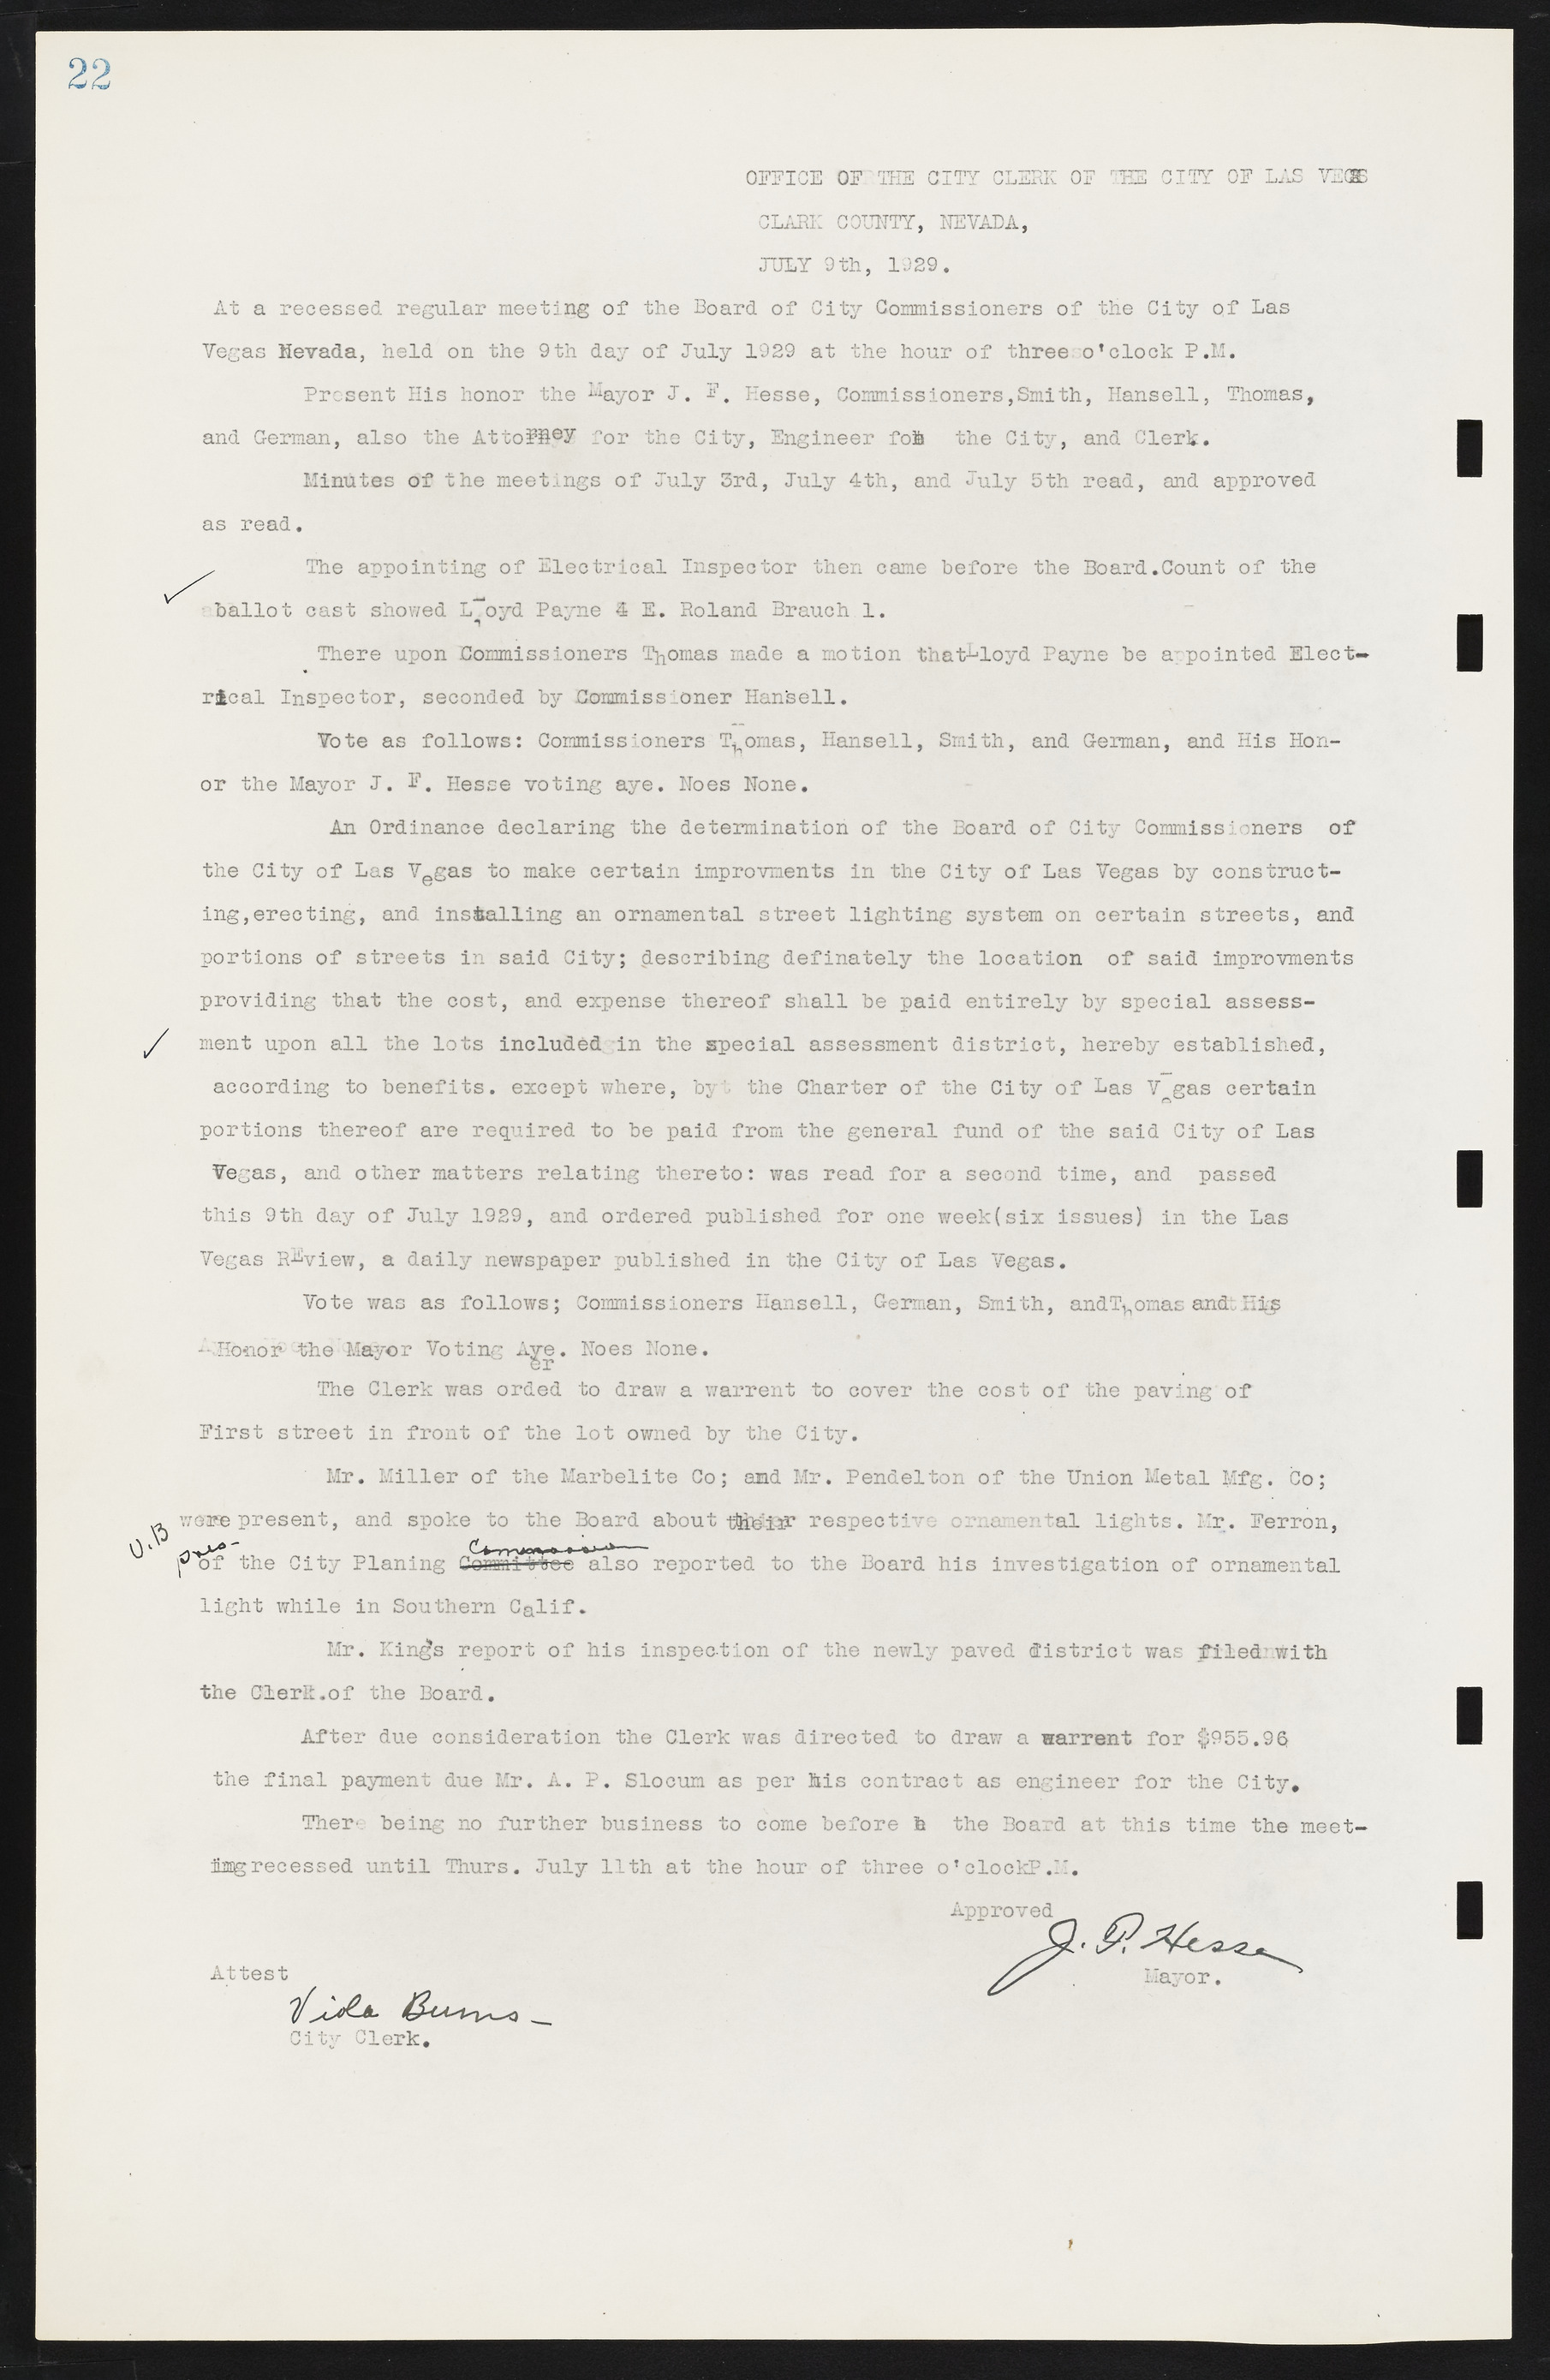 Las Vegas City Commission Minutes, May 14, 1929 to February 11, 1937, lvc000003-28